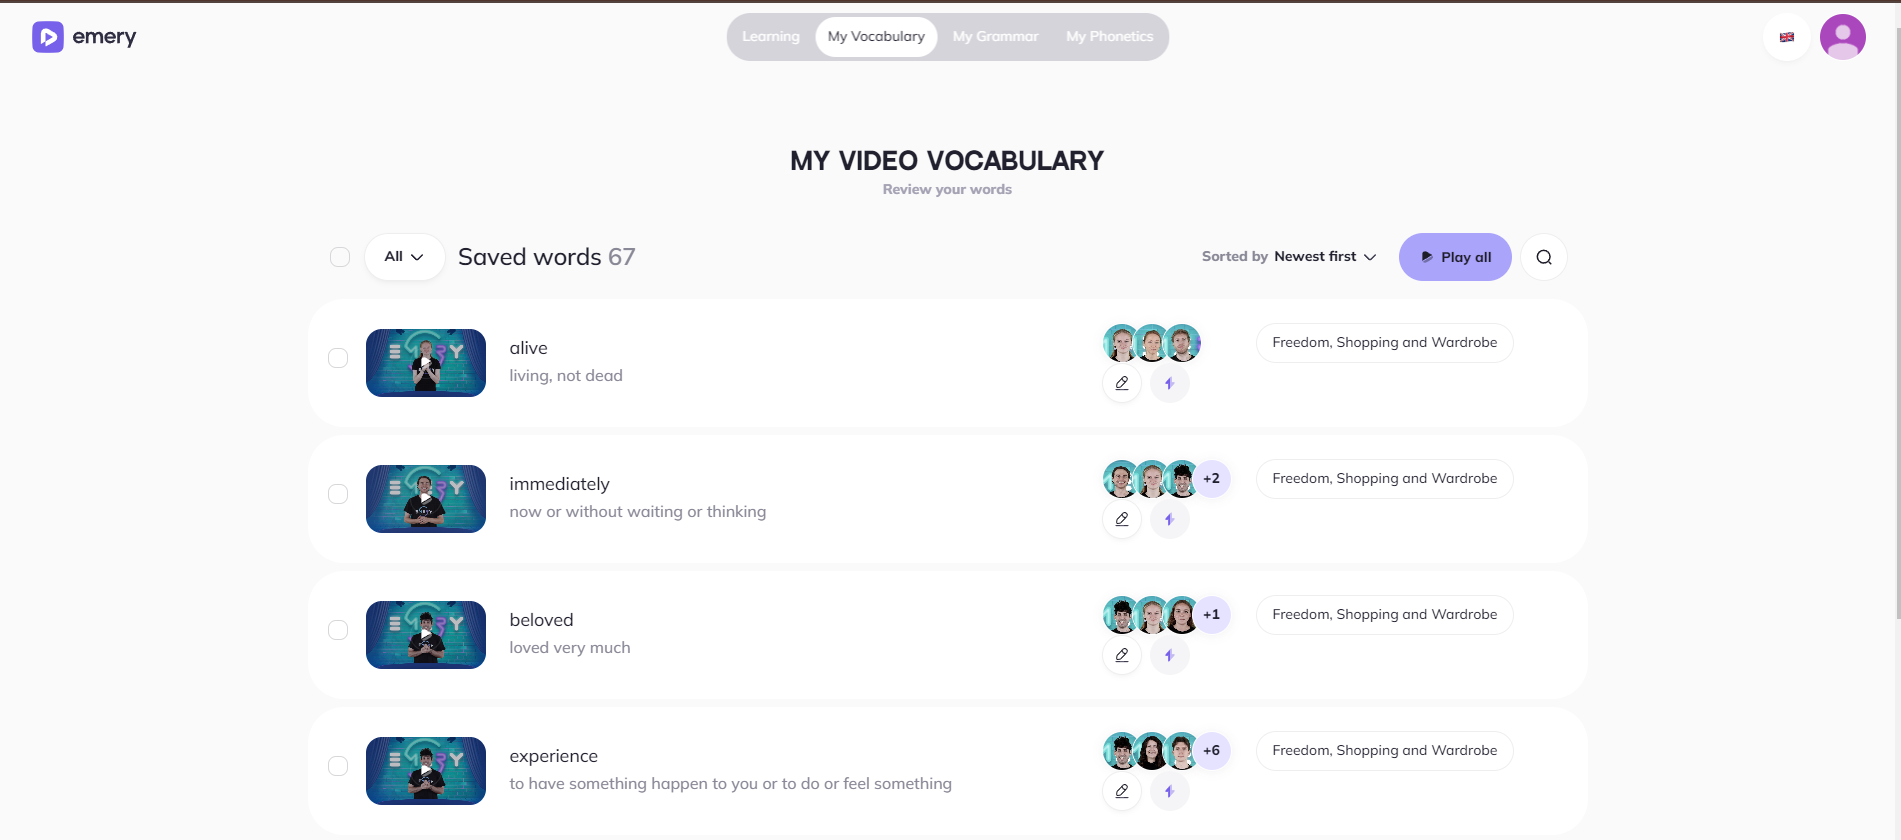 Video Dictionary in EMERY